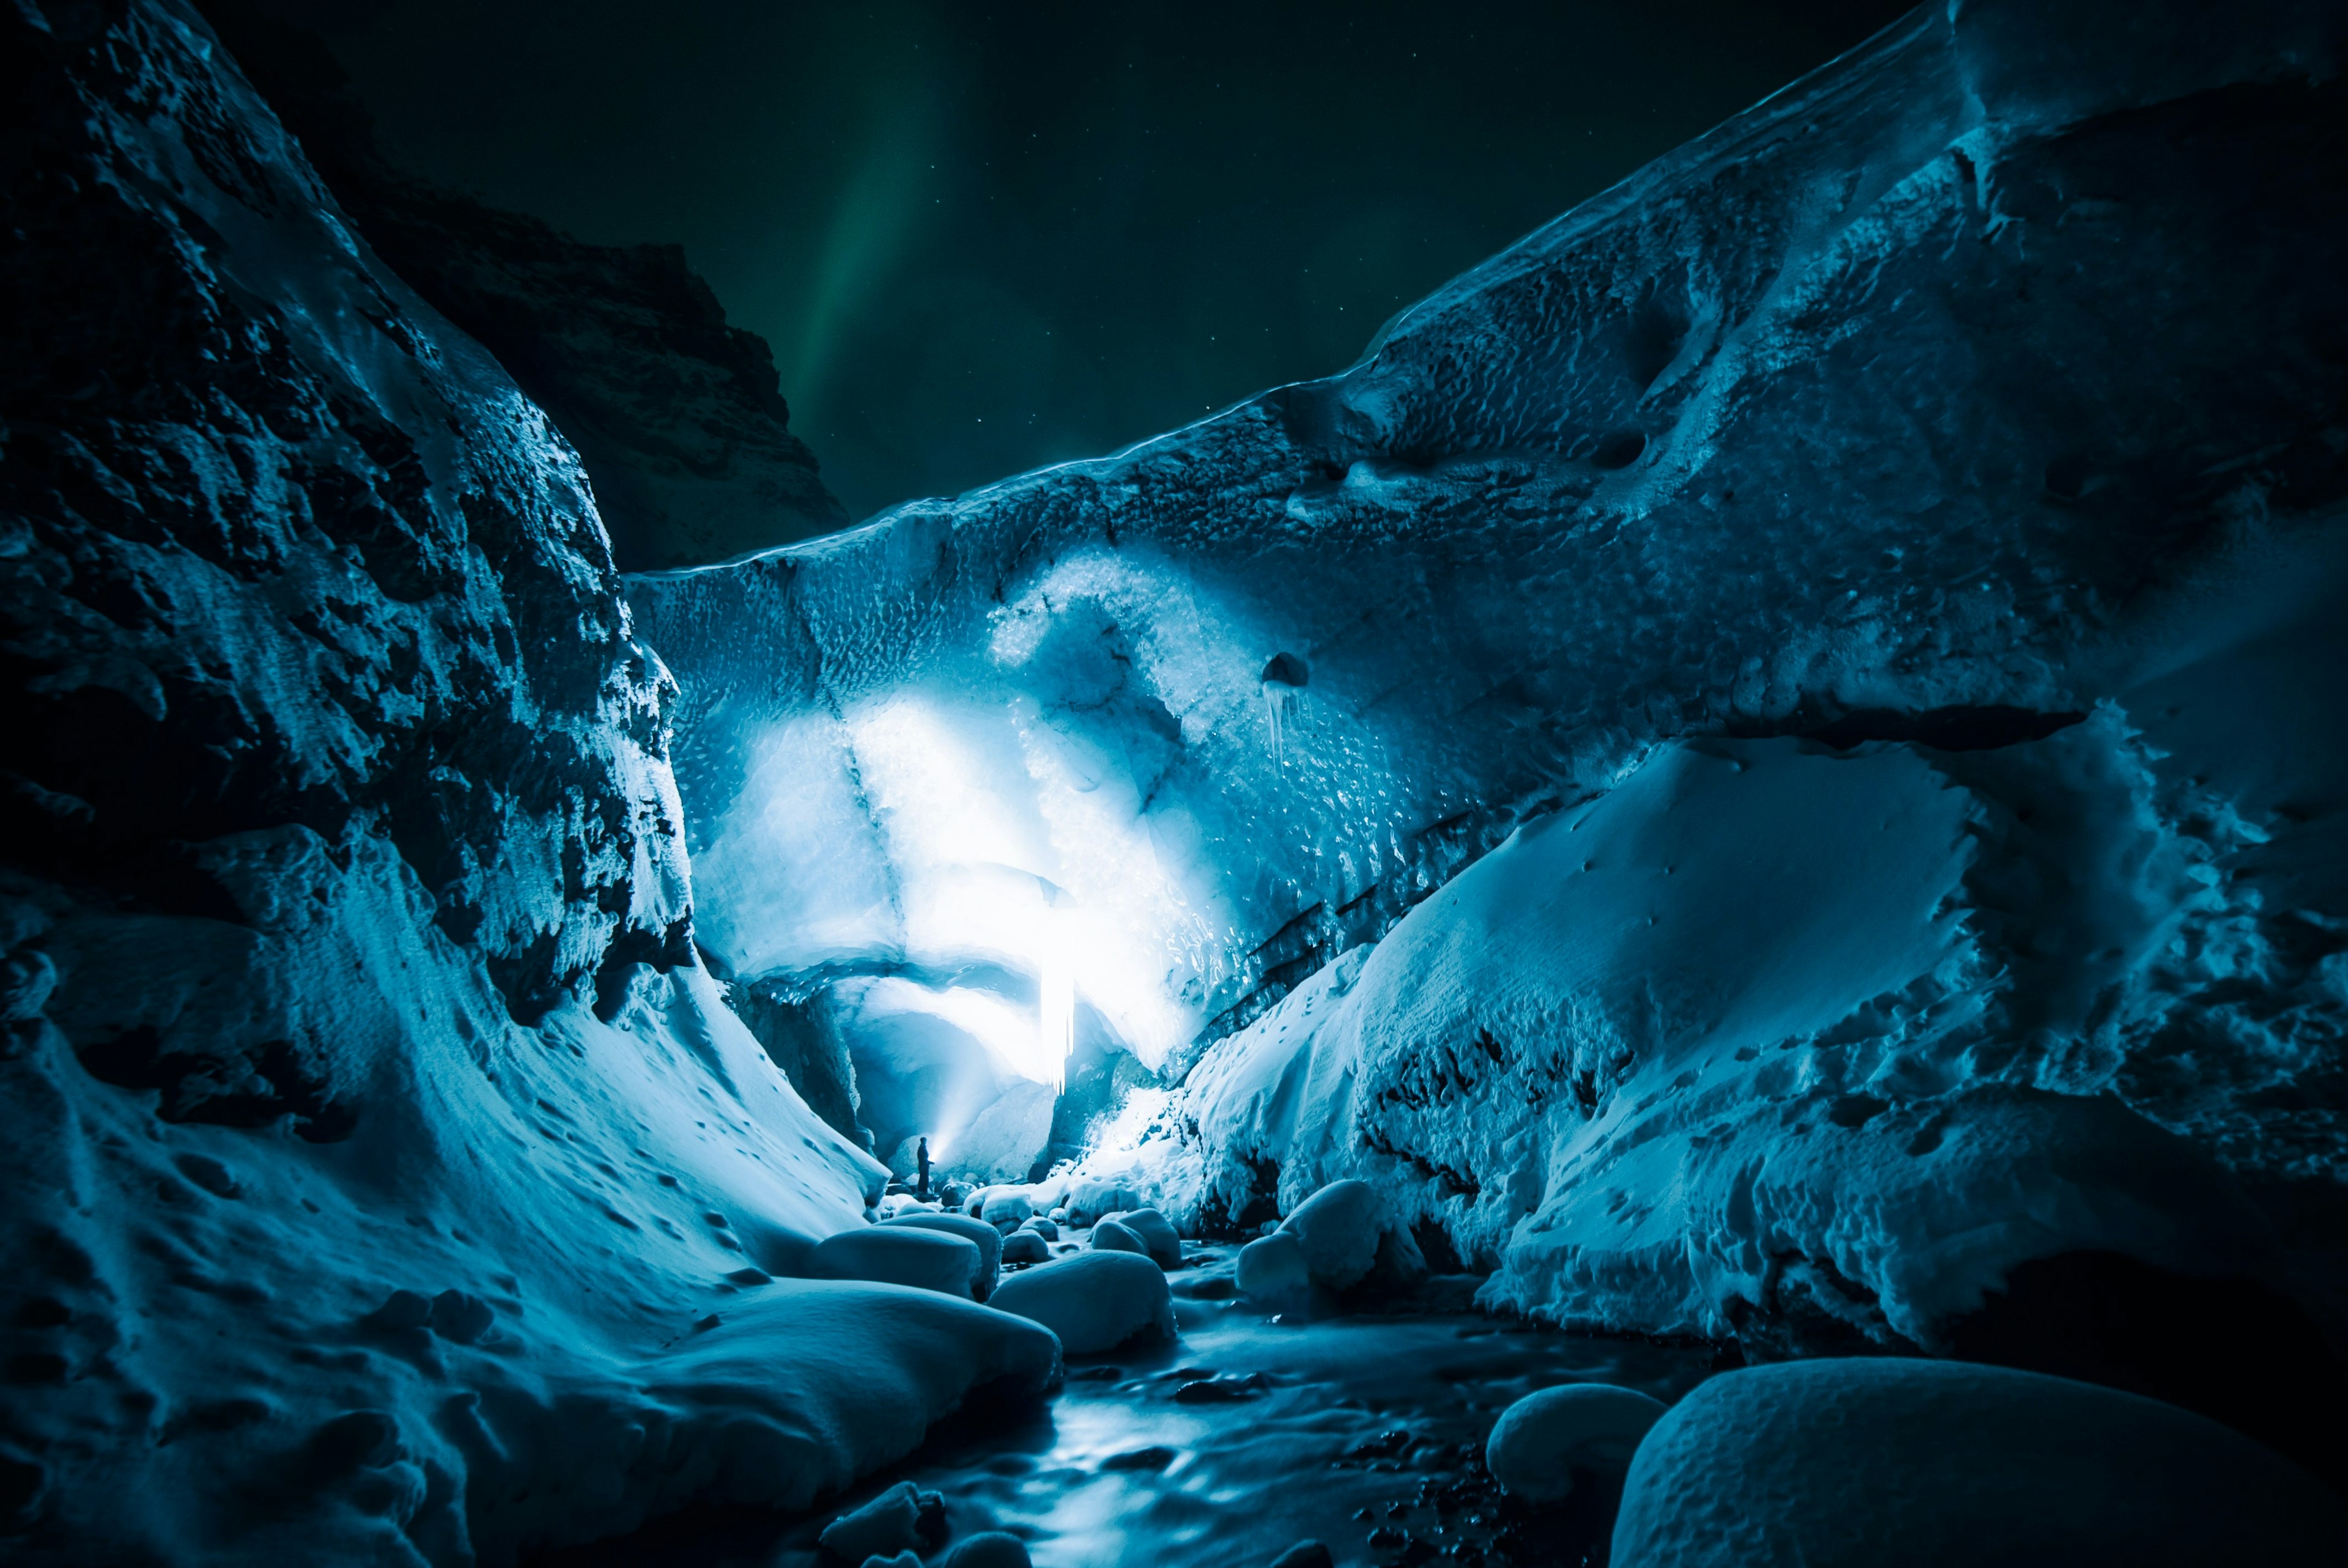 An illuminated ice cave in Iceland in winter